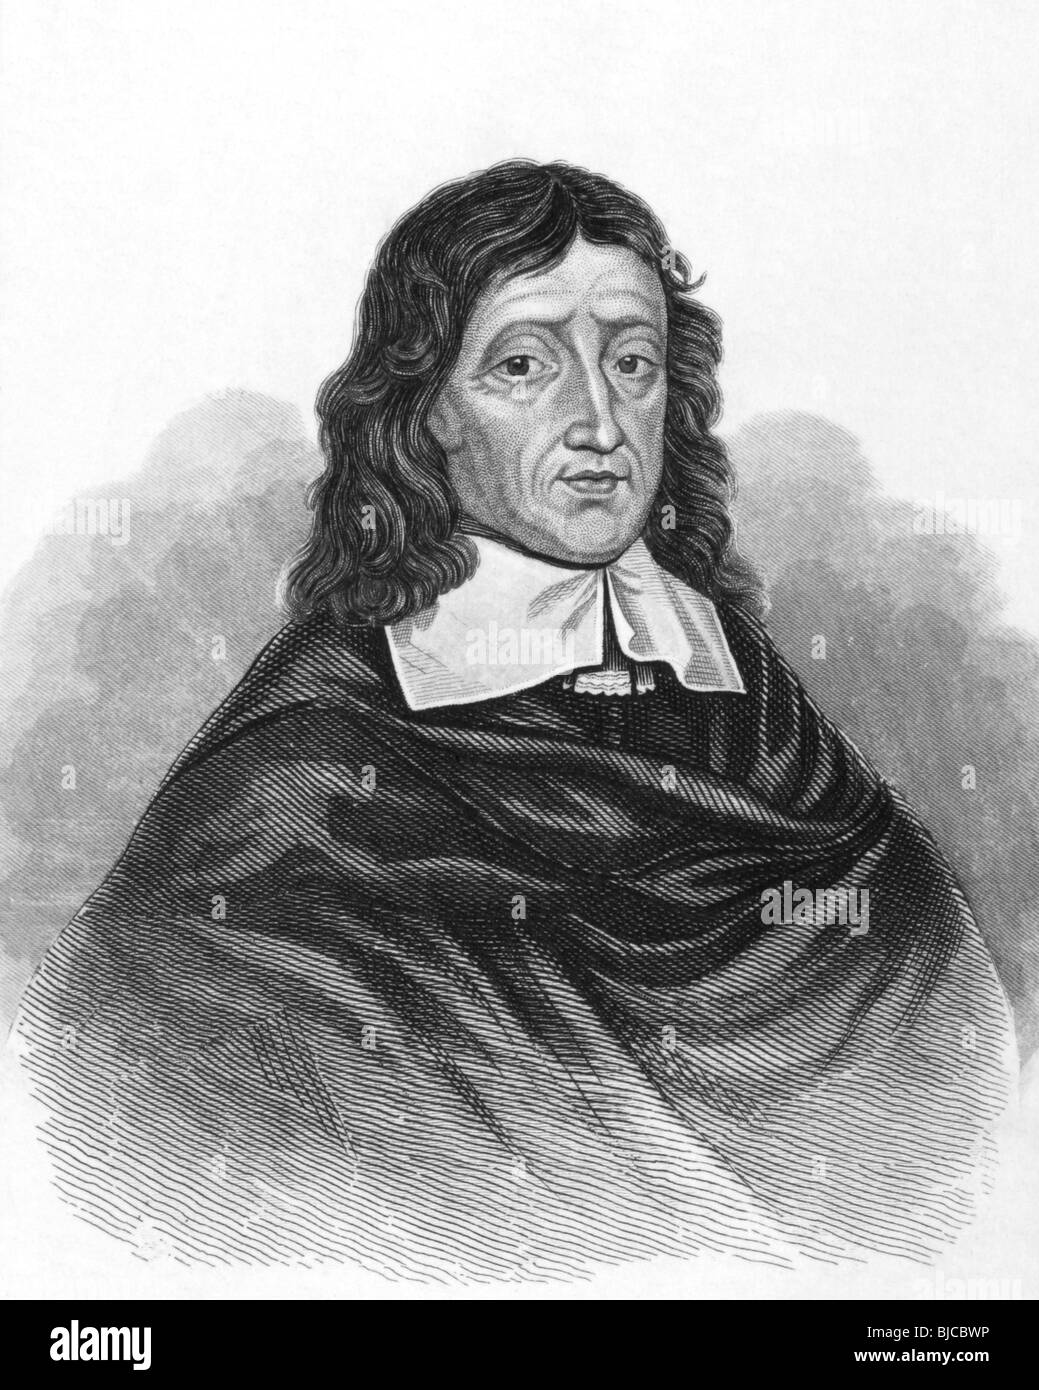 John Milton on engraving from the 1800s. English poet, author, polemicist and civil servant for the commonwealth of England. Stock Photo